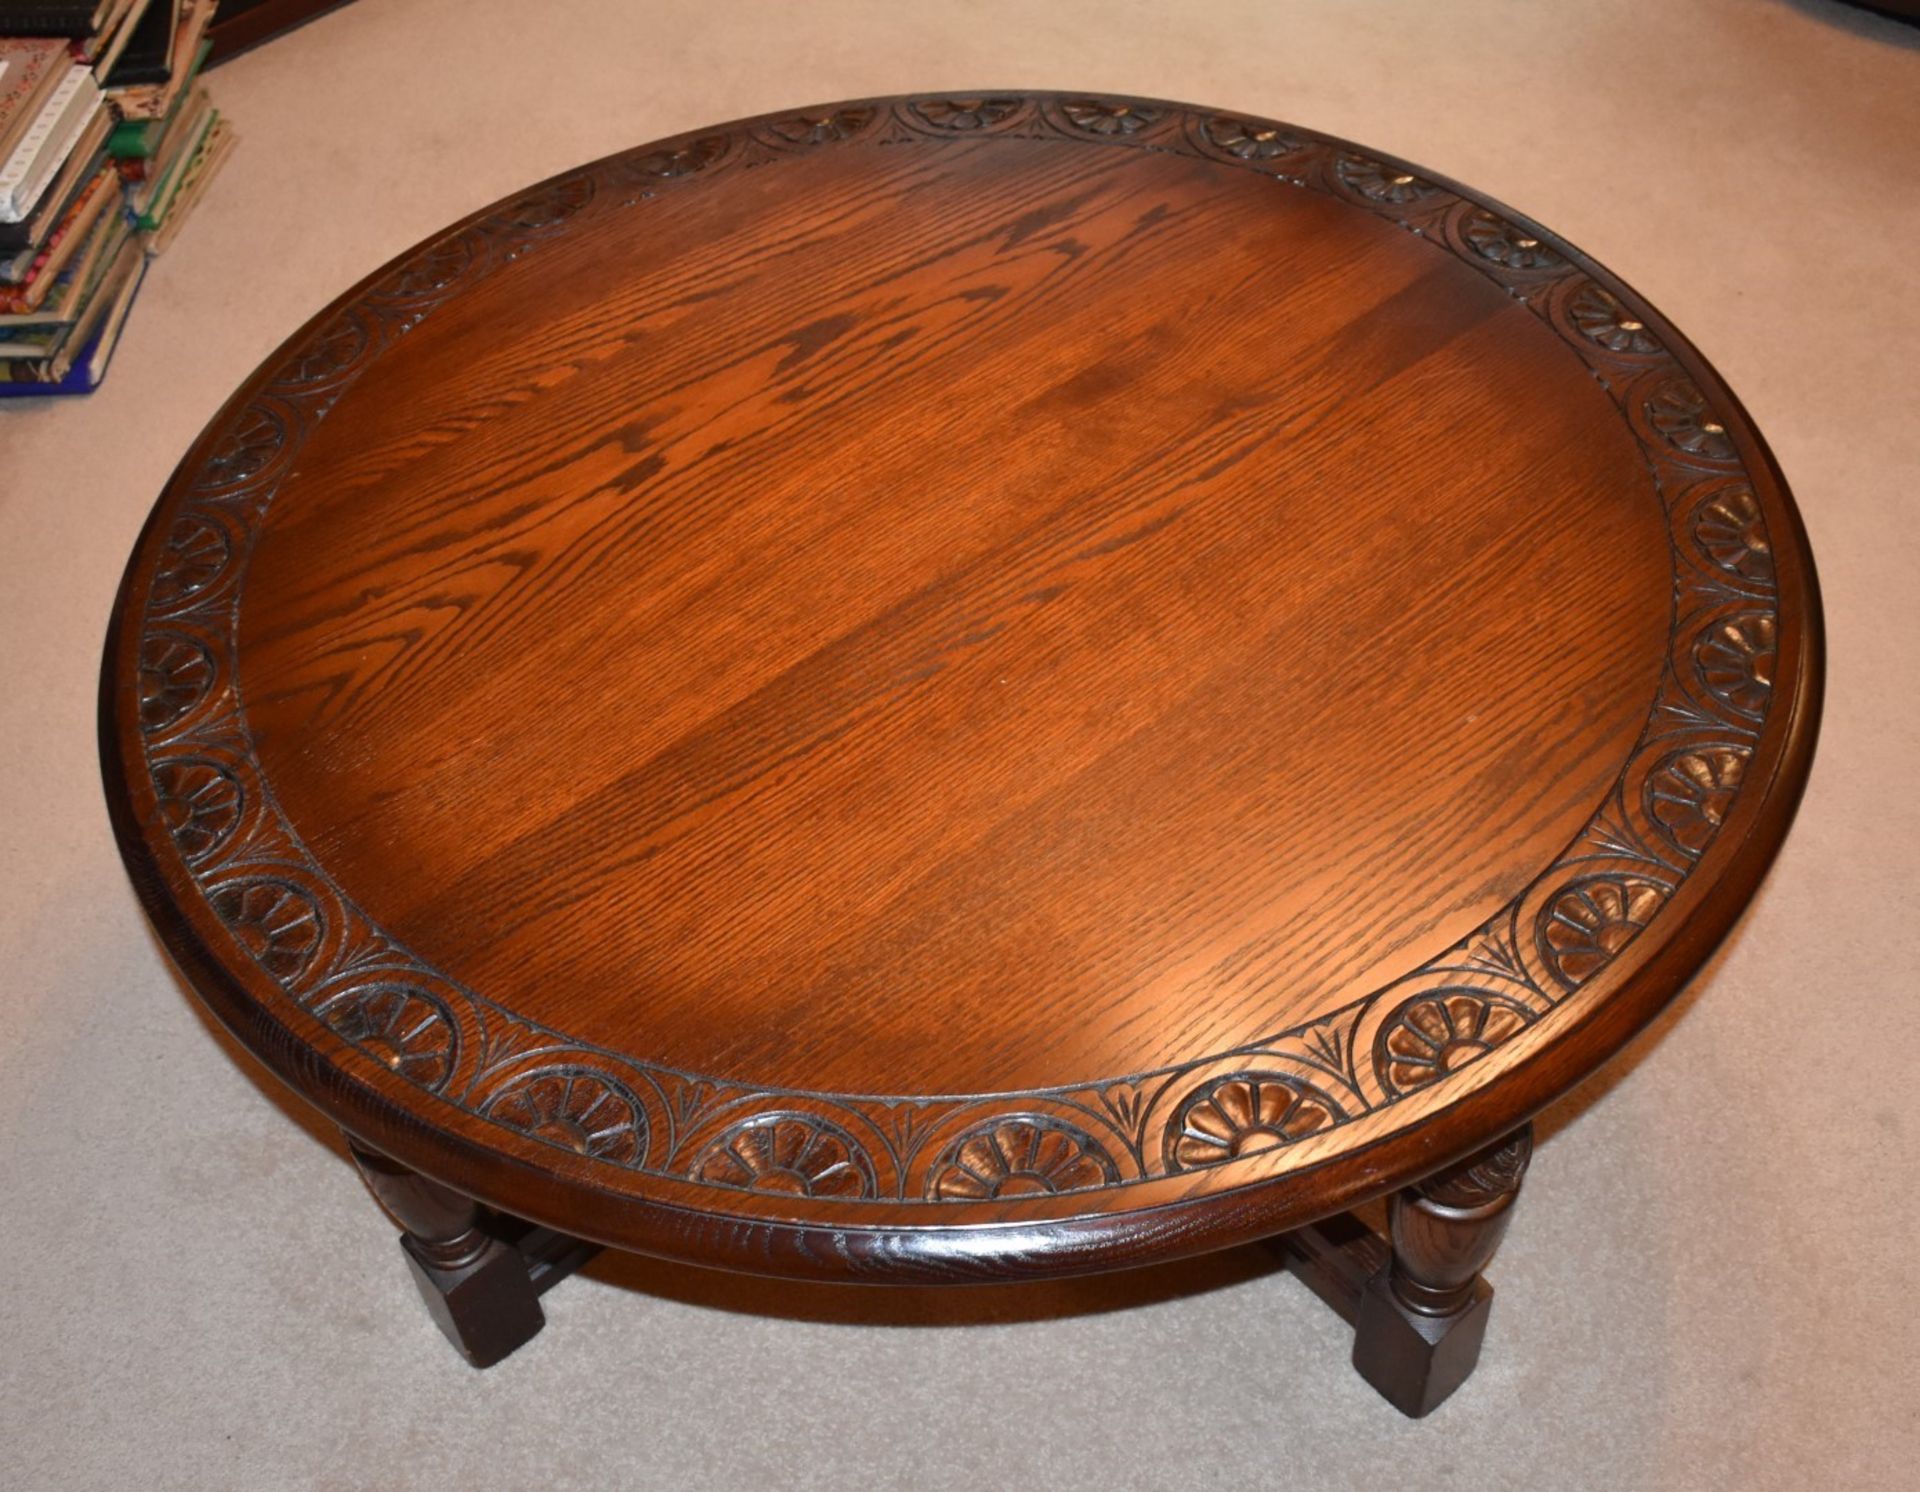 1 x Round Carved Oak Coffee Table By Jaycee - JacobeanStyle With Turned Legs, Joining Stretchers and - Image 4 of 8